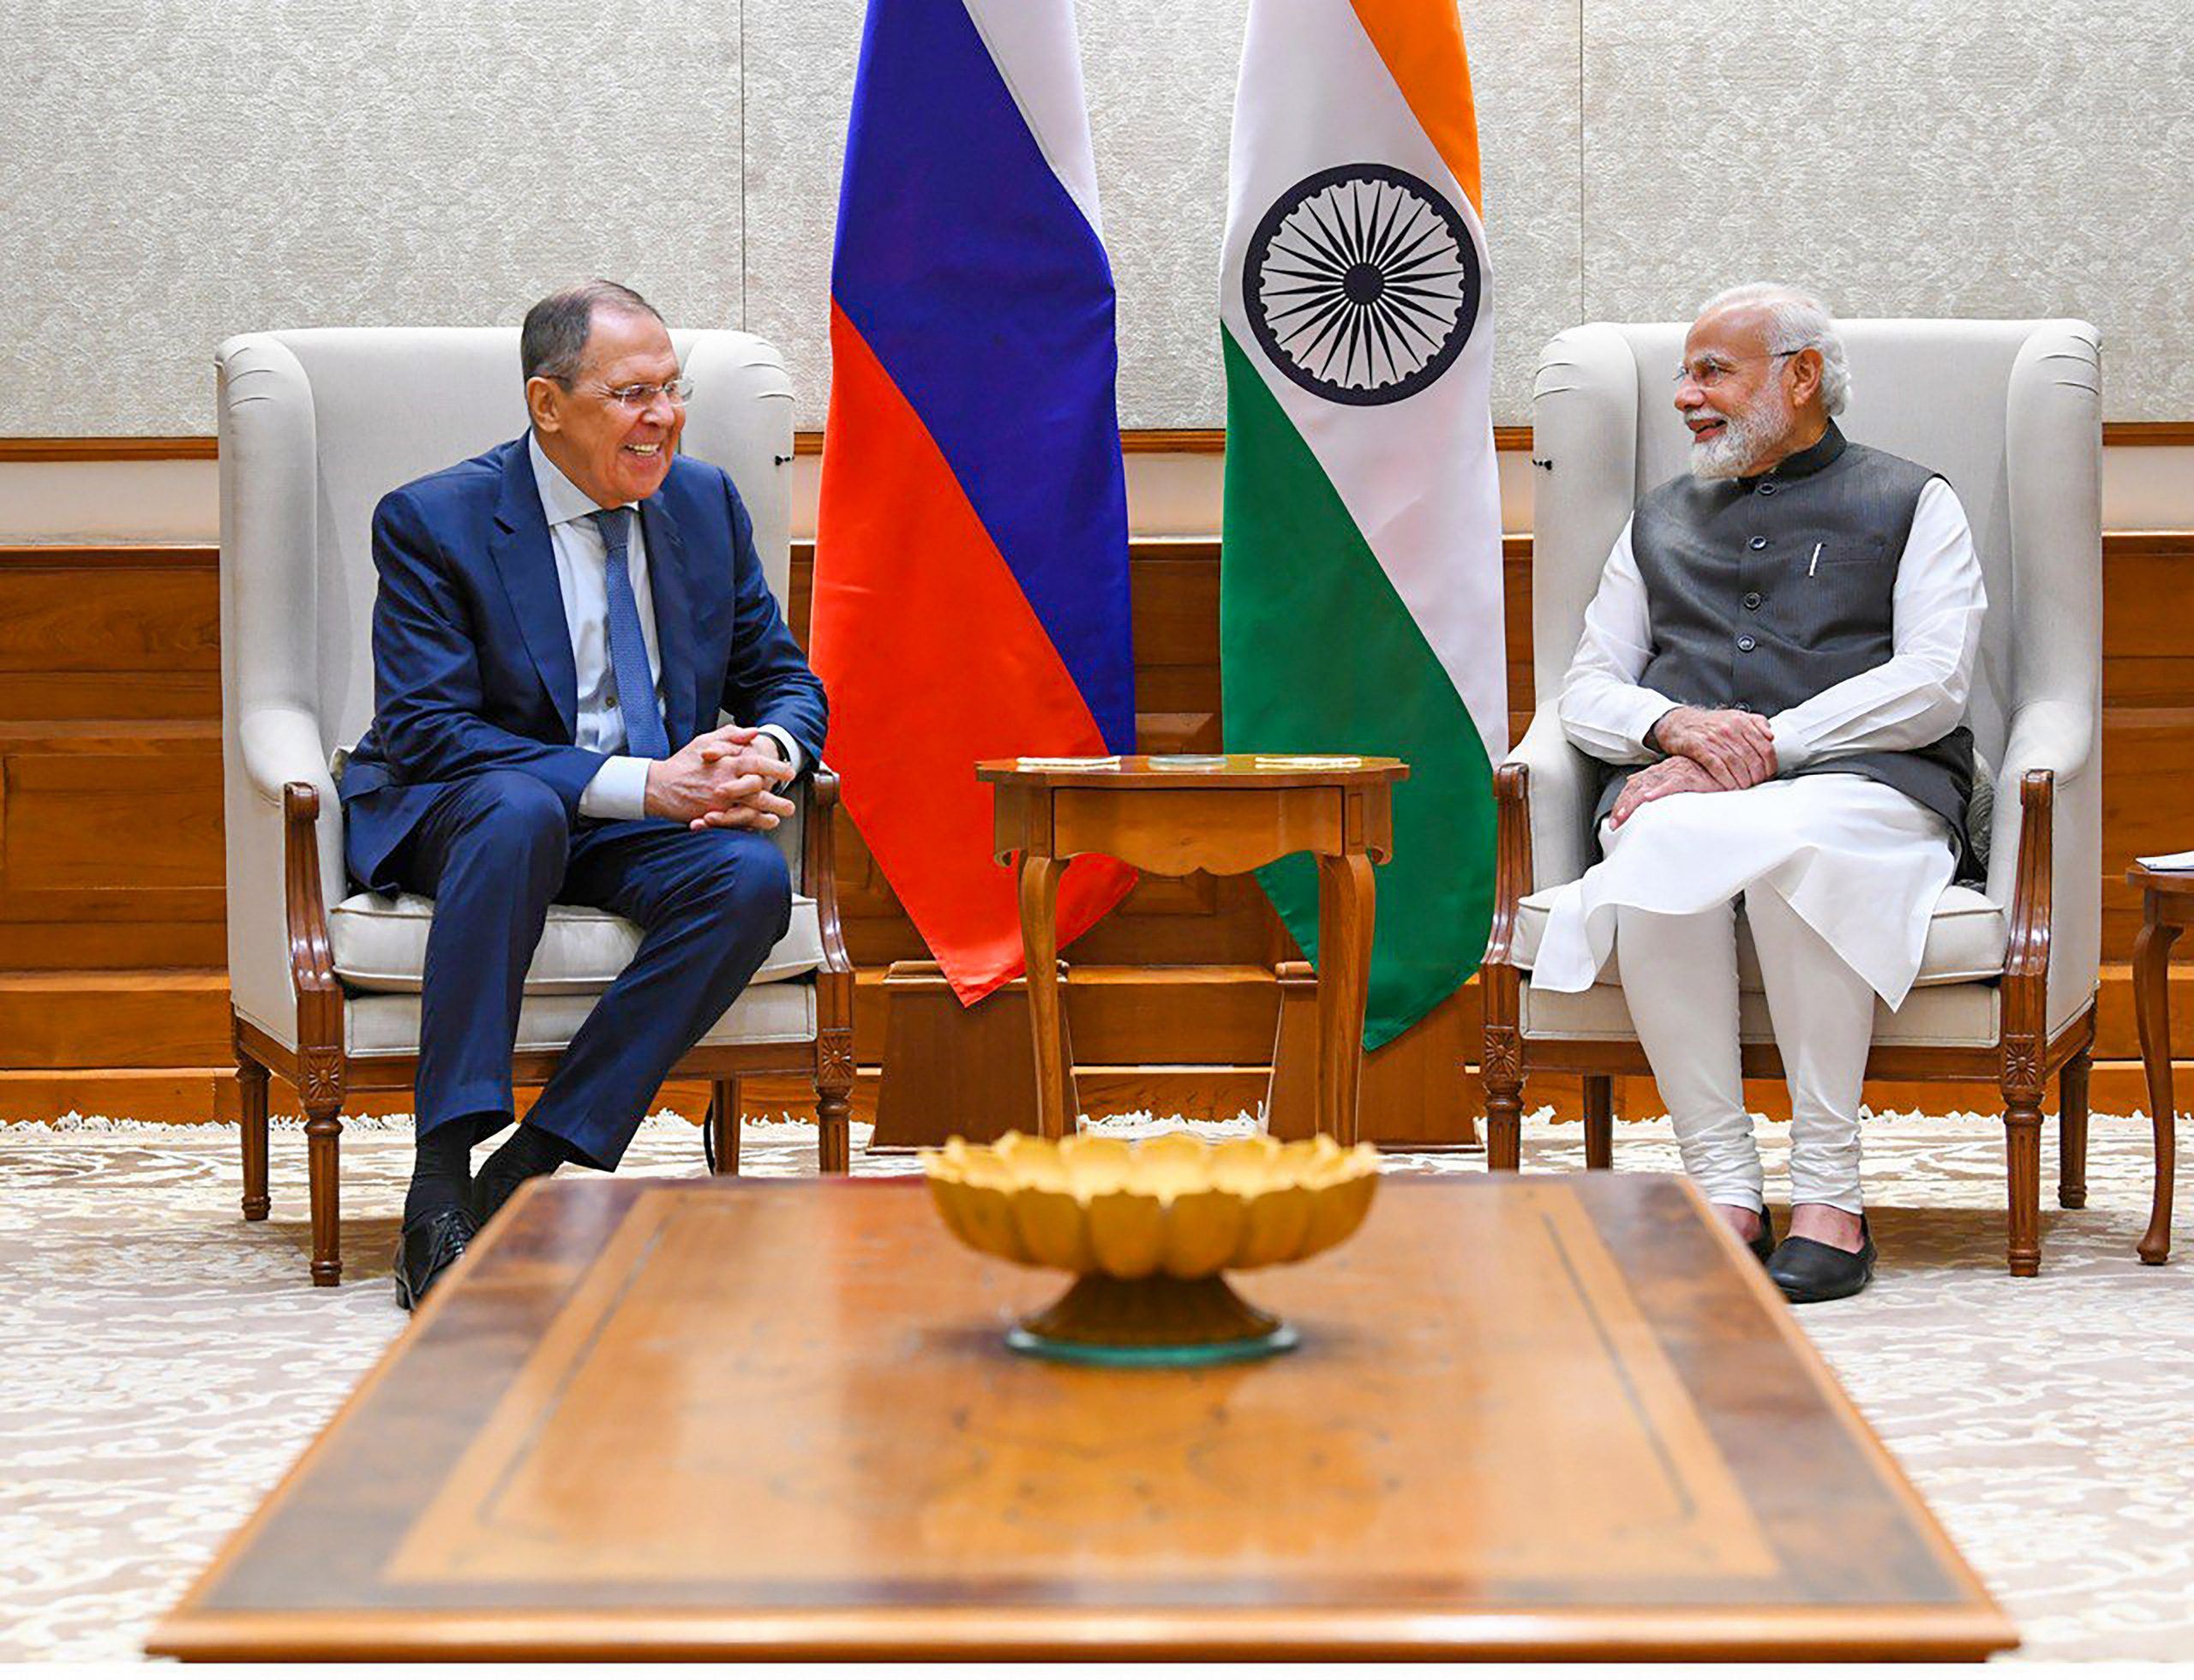 Can India look past differences with China at Russia’s behest?